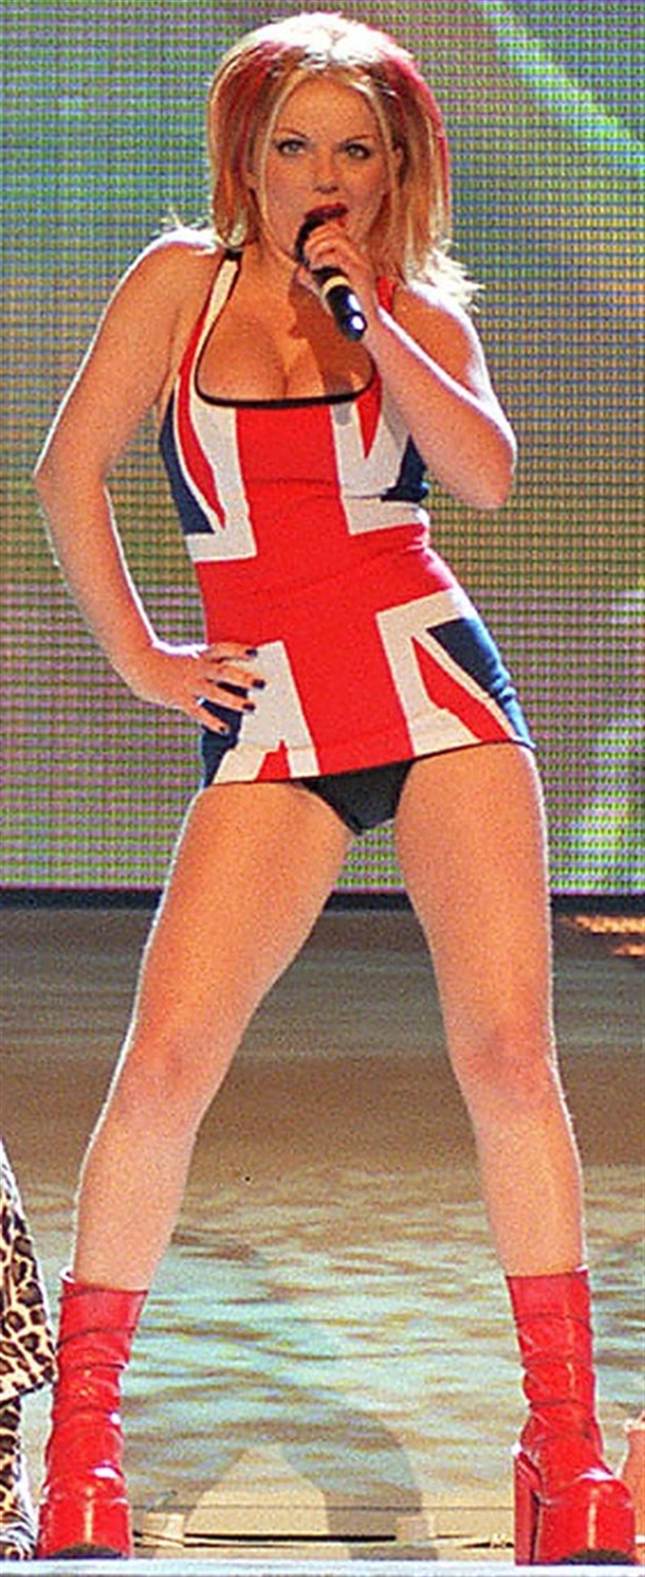 Geri Halliwell aka Ginger Spice - "First my mother was Spanish. Then she became a Jehovahs Witness."